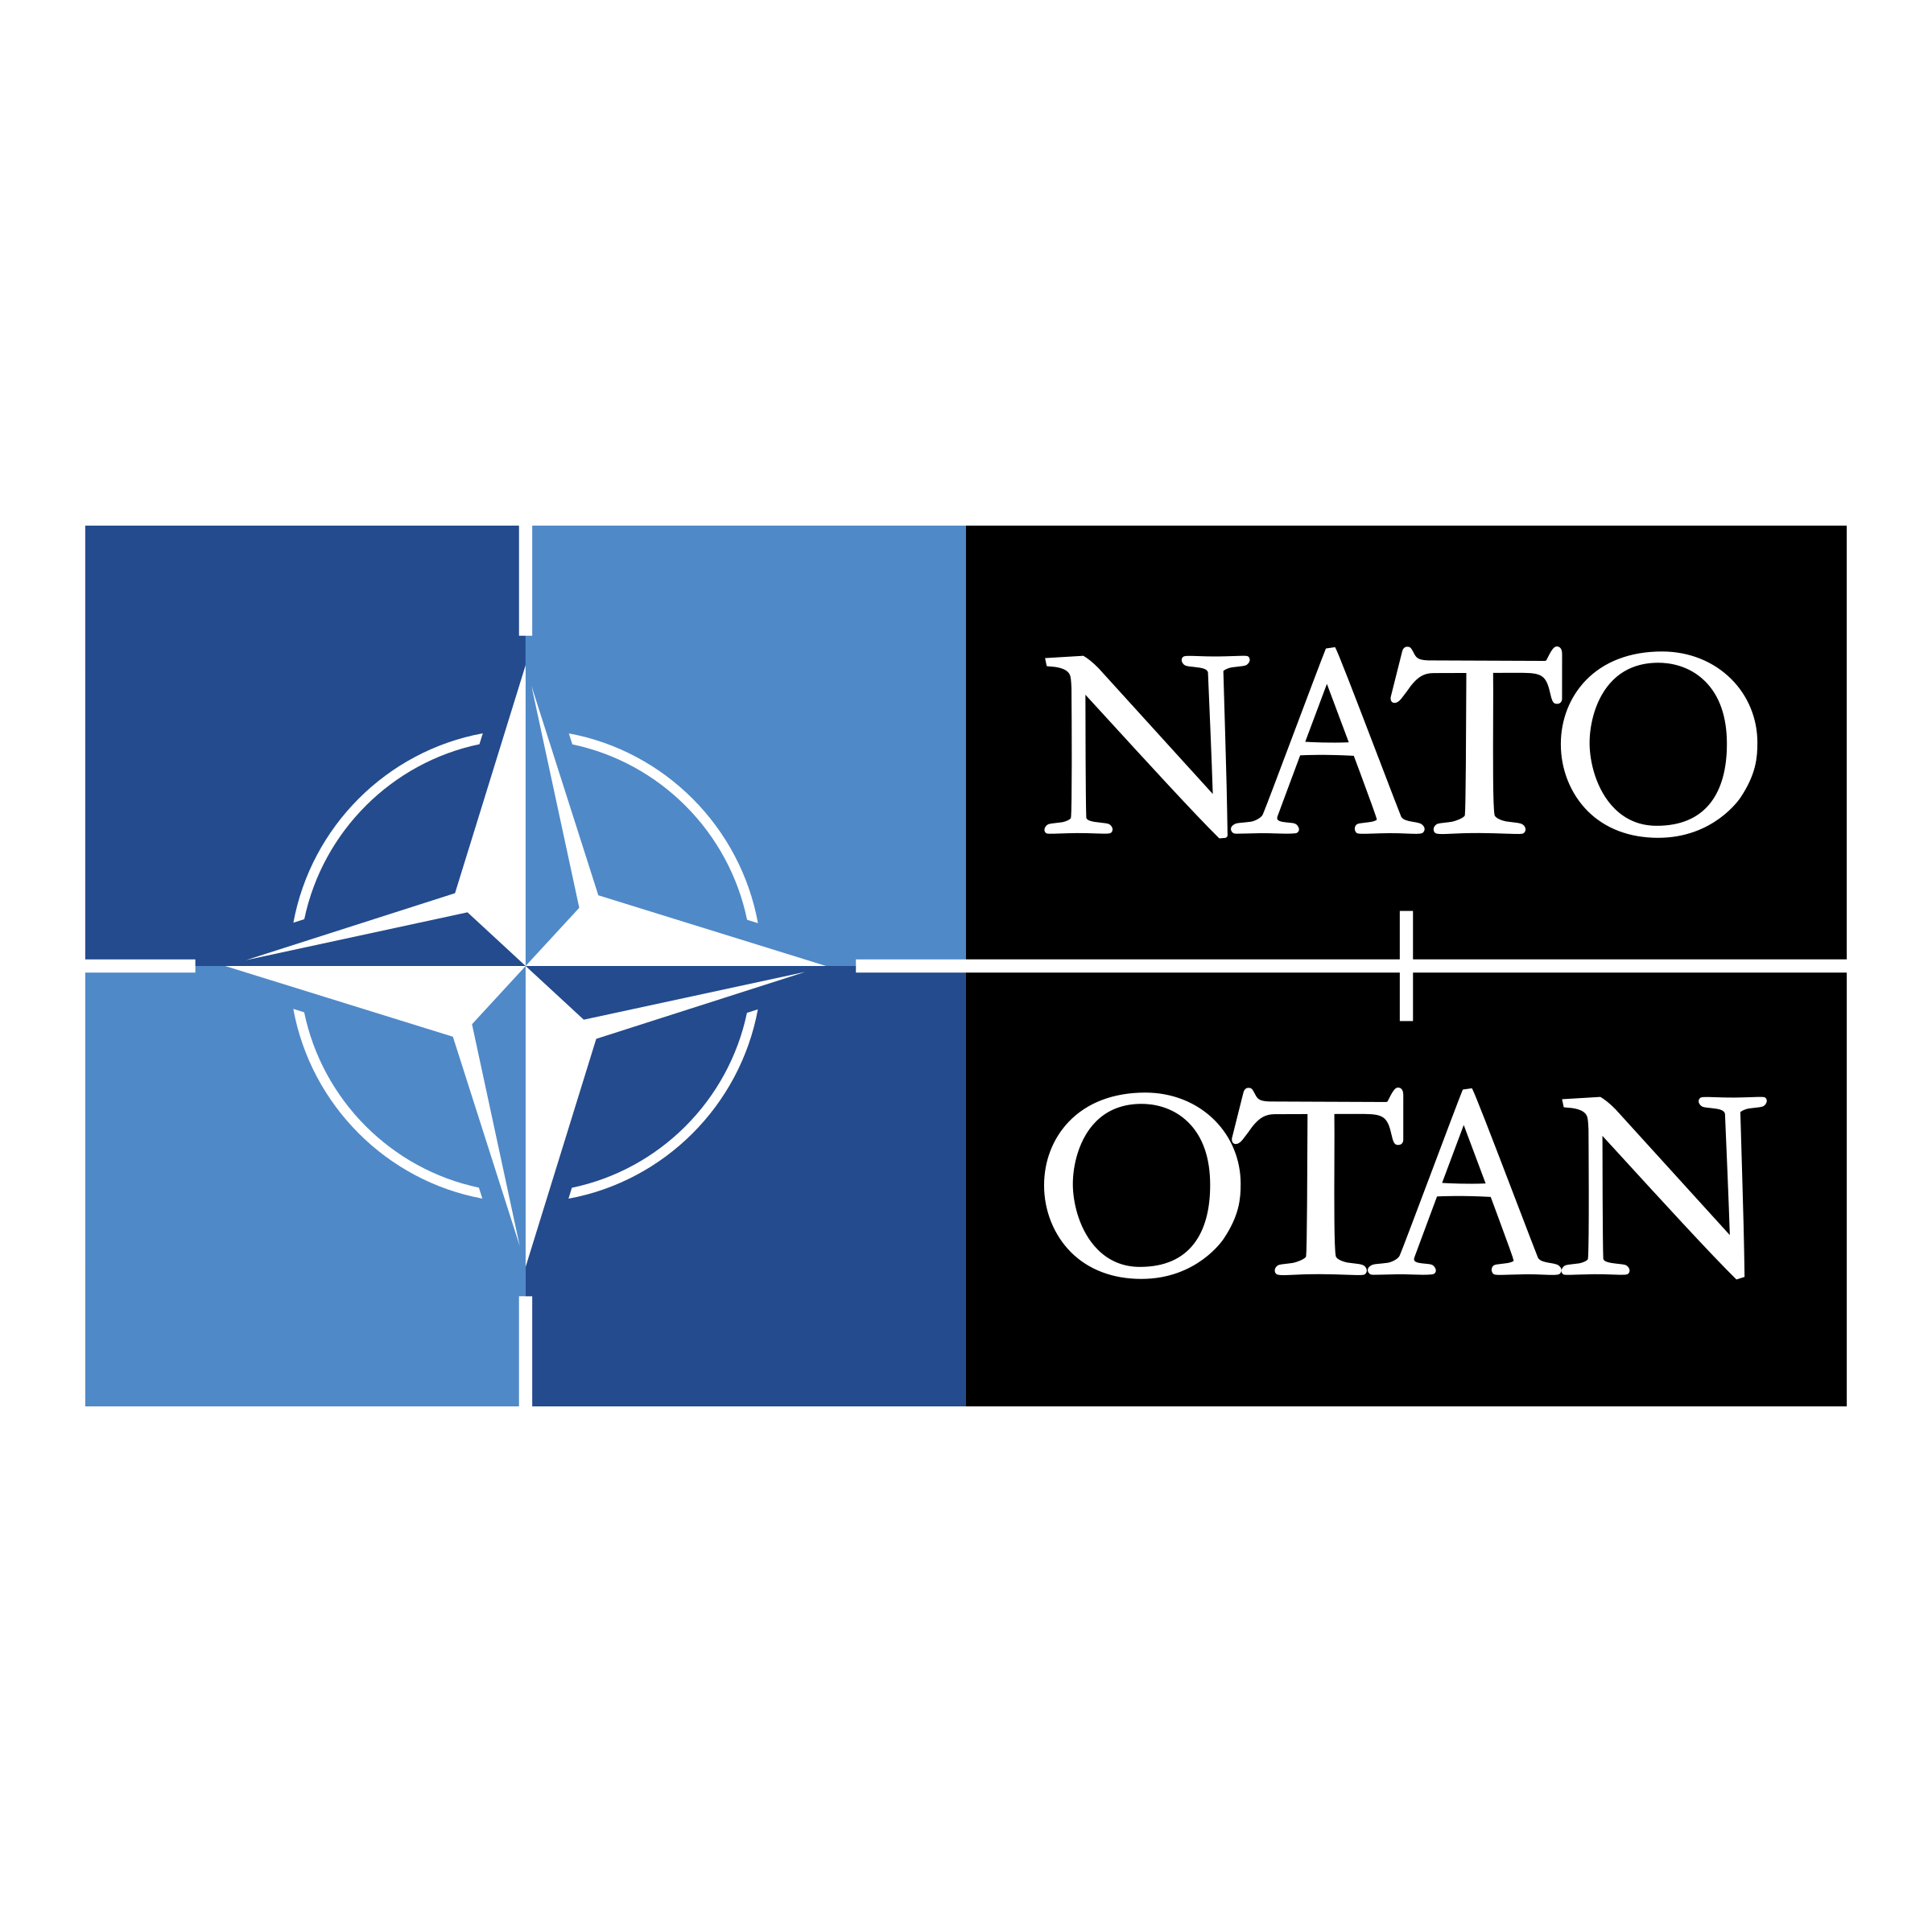 Logo NATO PNG trong suốt & Vector SVG - Cung cấp miễn phí